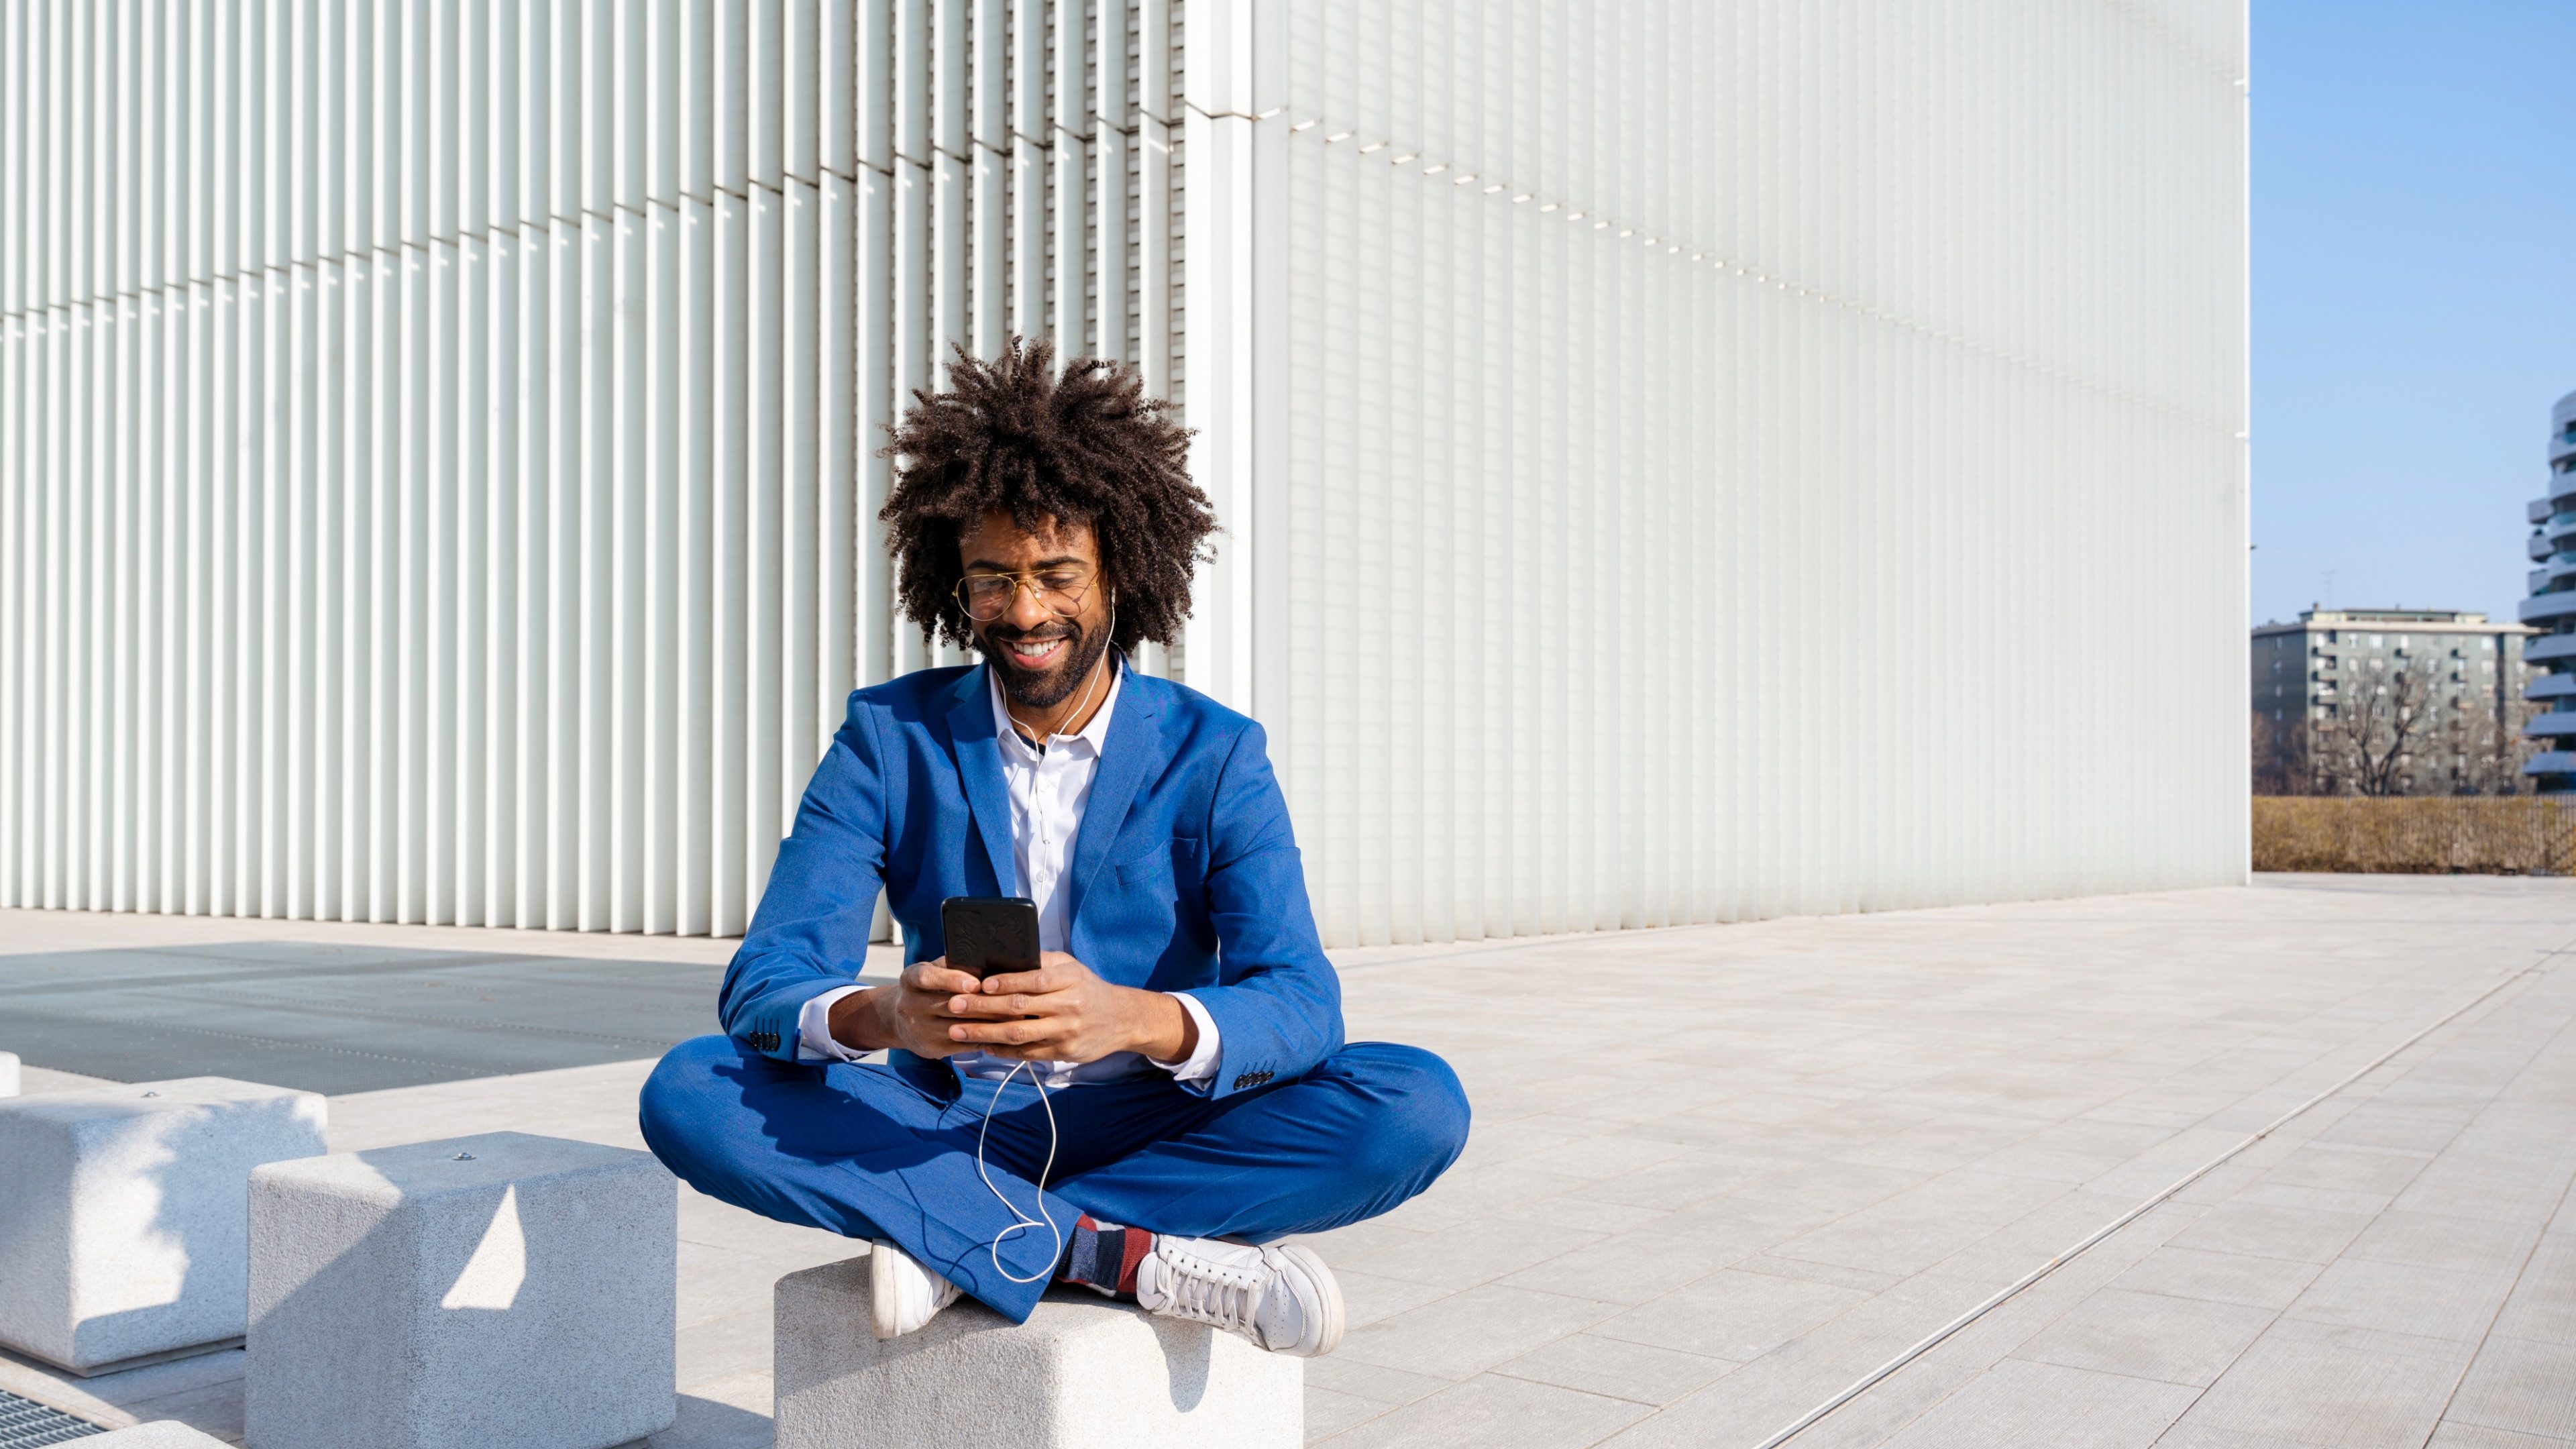 Smiling businessman listening music and using smart phone sitting on concrete block